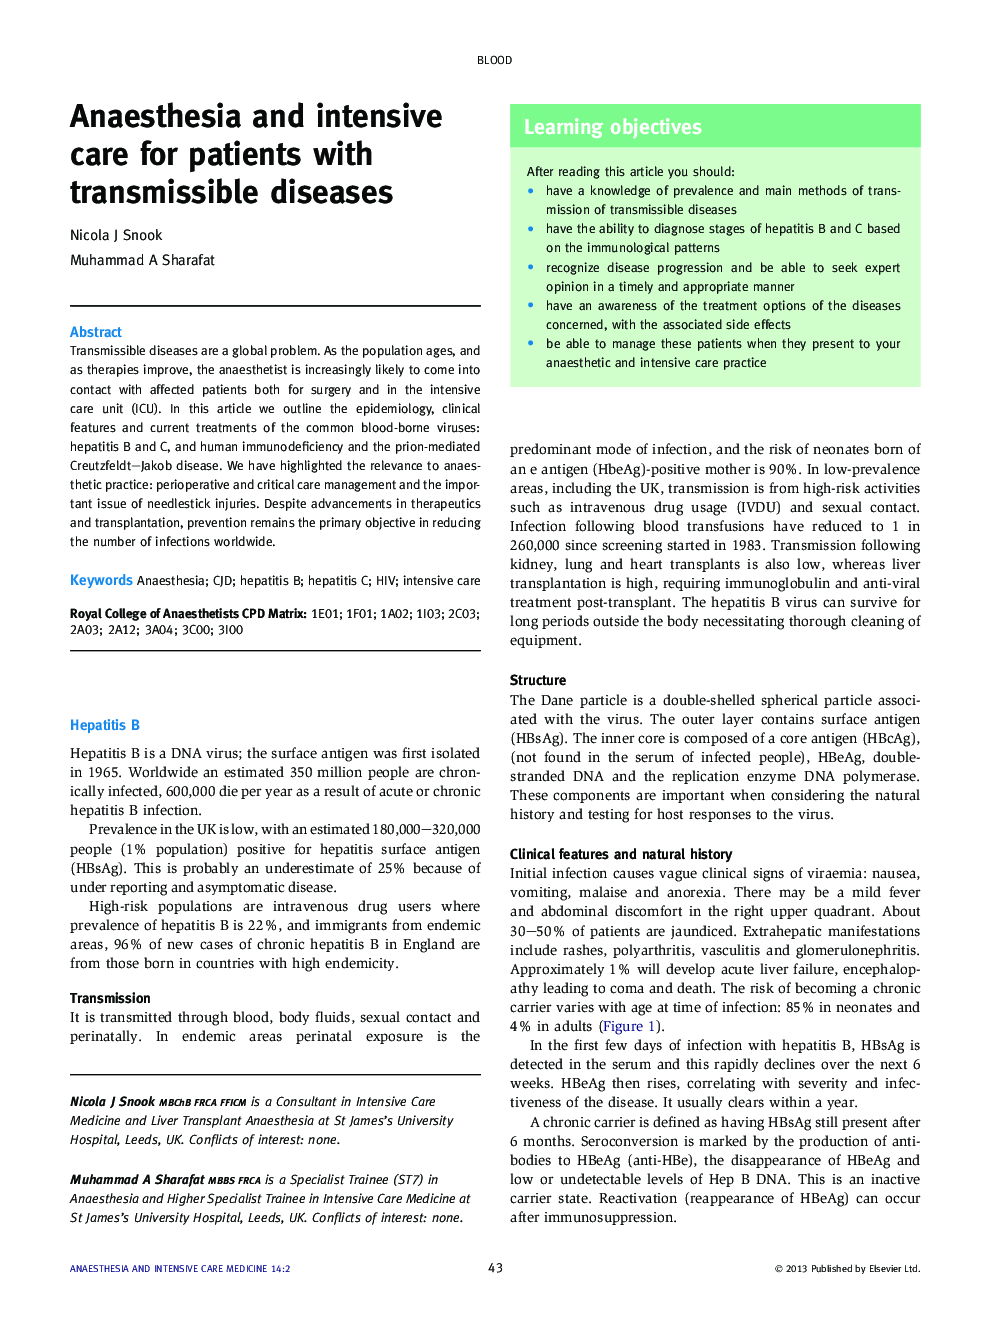 Anaesthesia and intensive care for patients with transmissible diseases